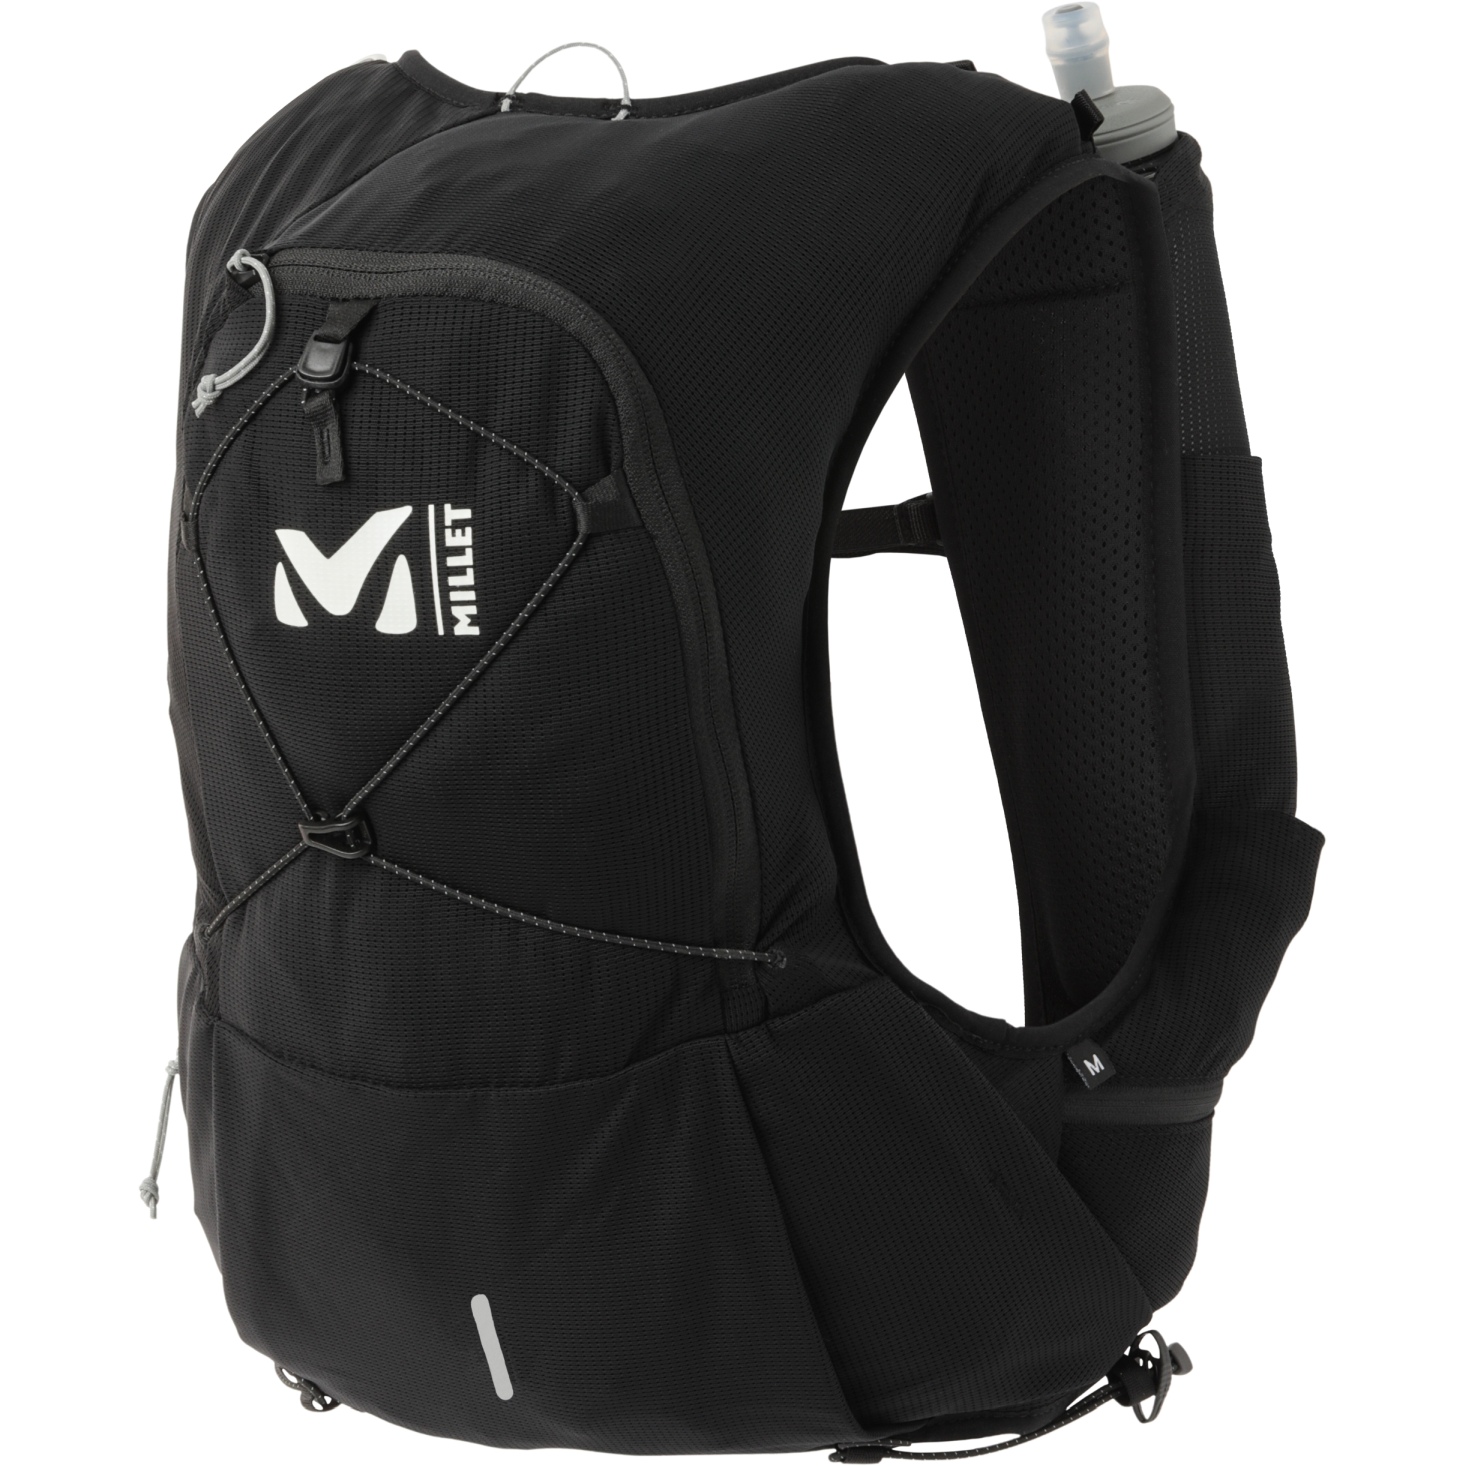 Picture of Millet Intense 12 Trail Running Backpack - Black 0247